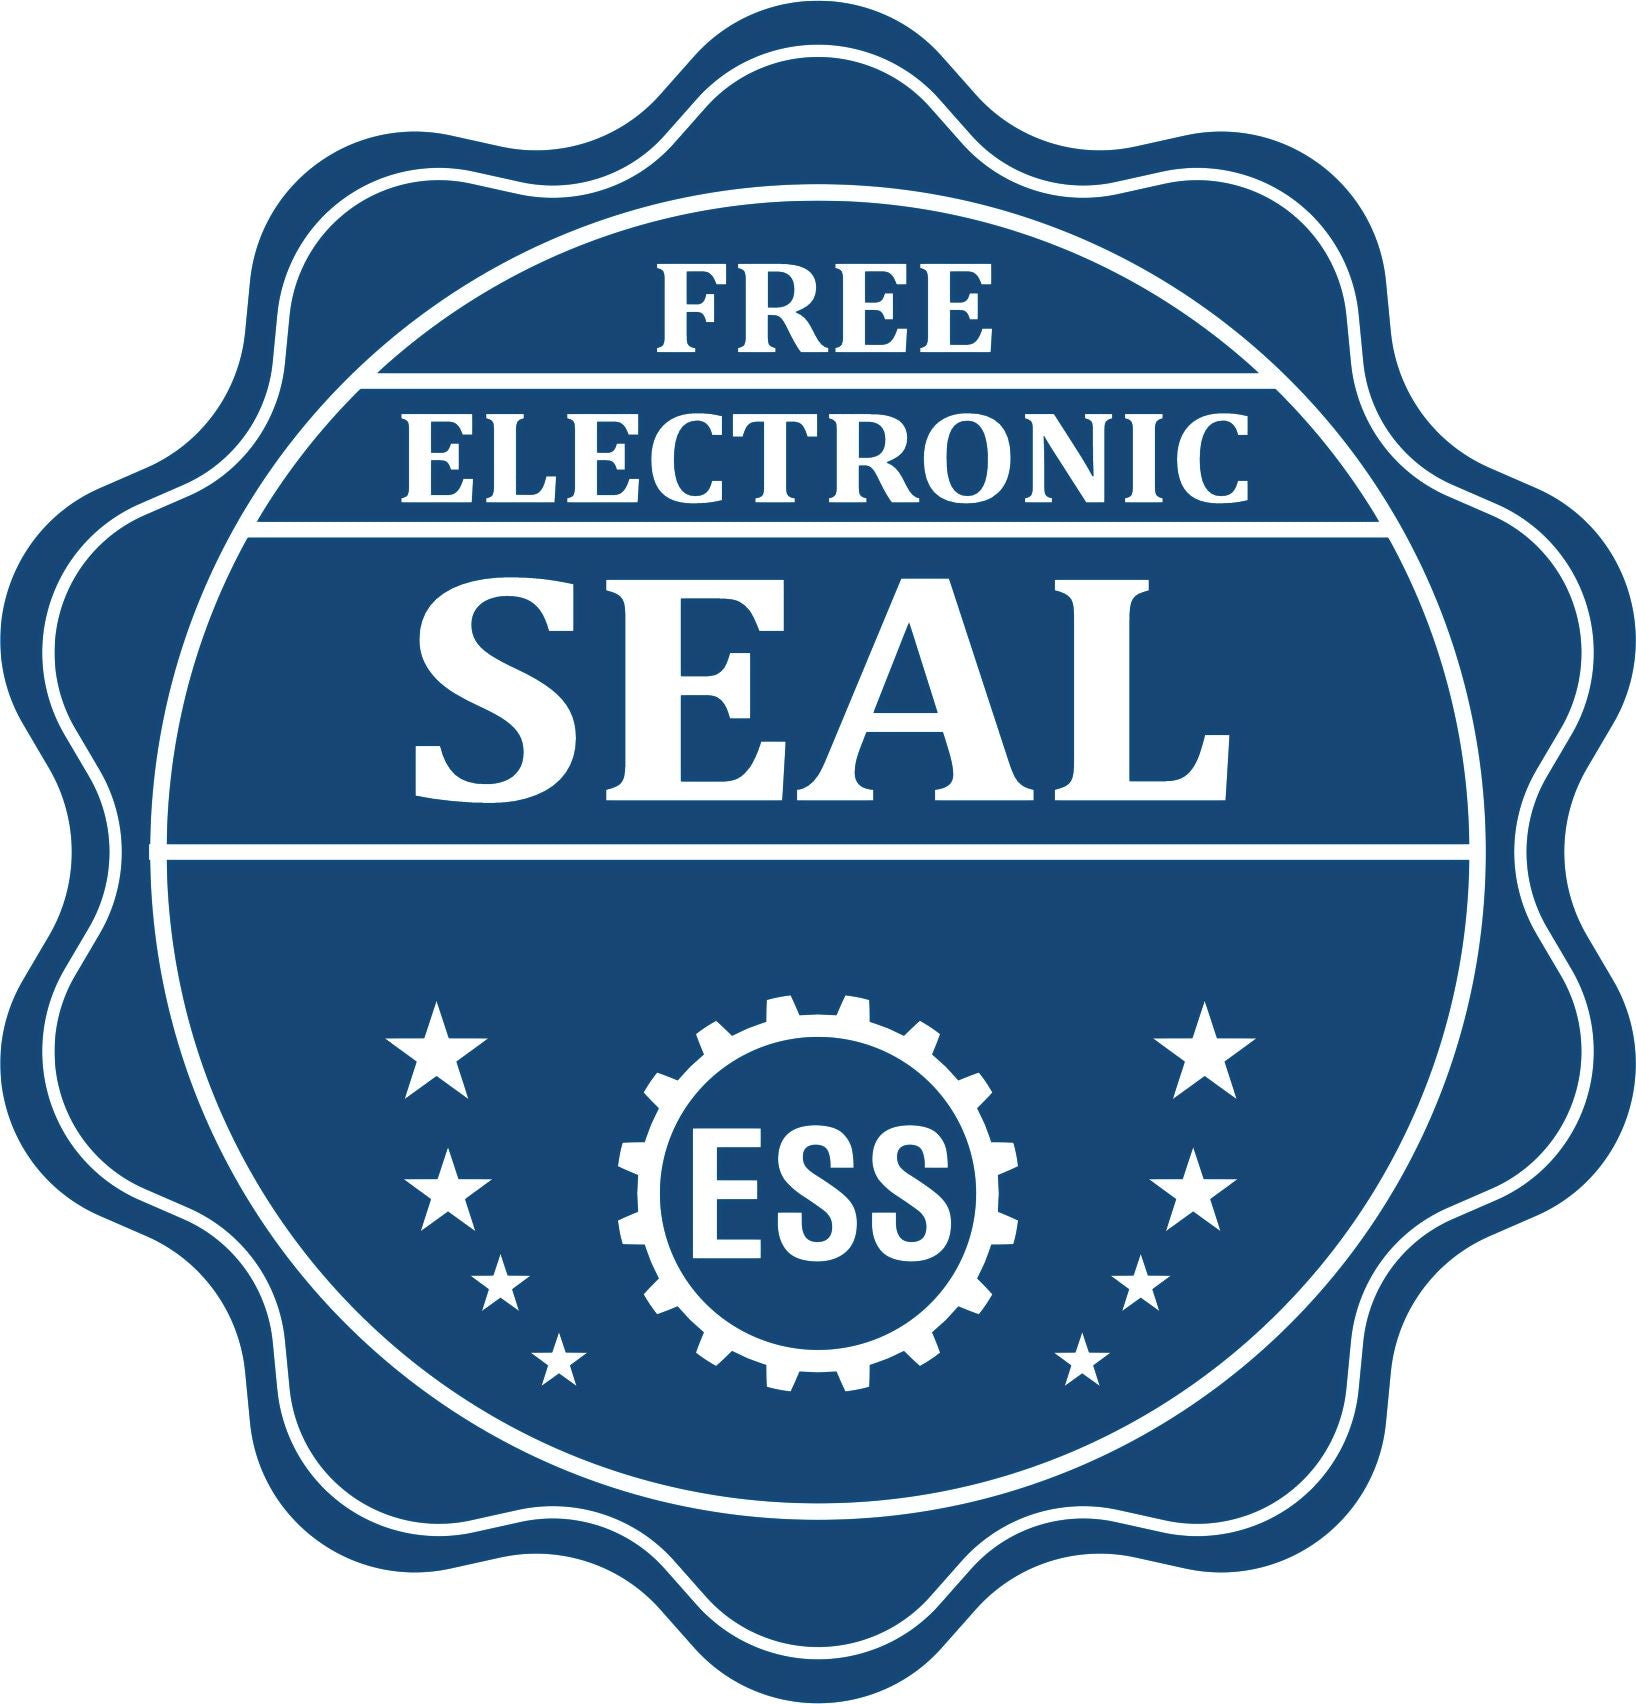 A badge showing a free electronic seal for the Premium MaxLight Pre-Inked Indiana Engineering Stamp with stars and the ESS gear on the emblem.